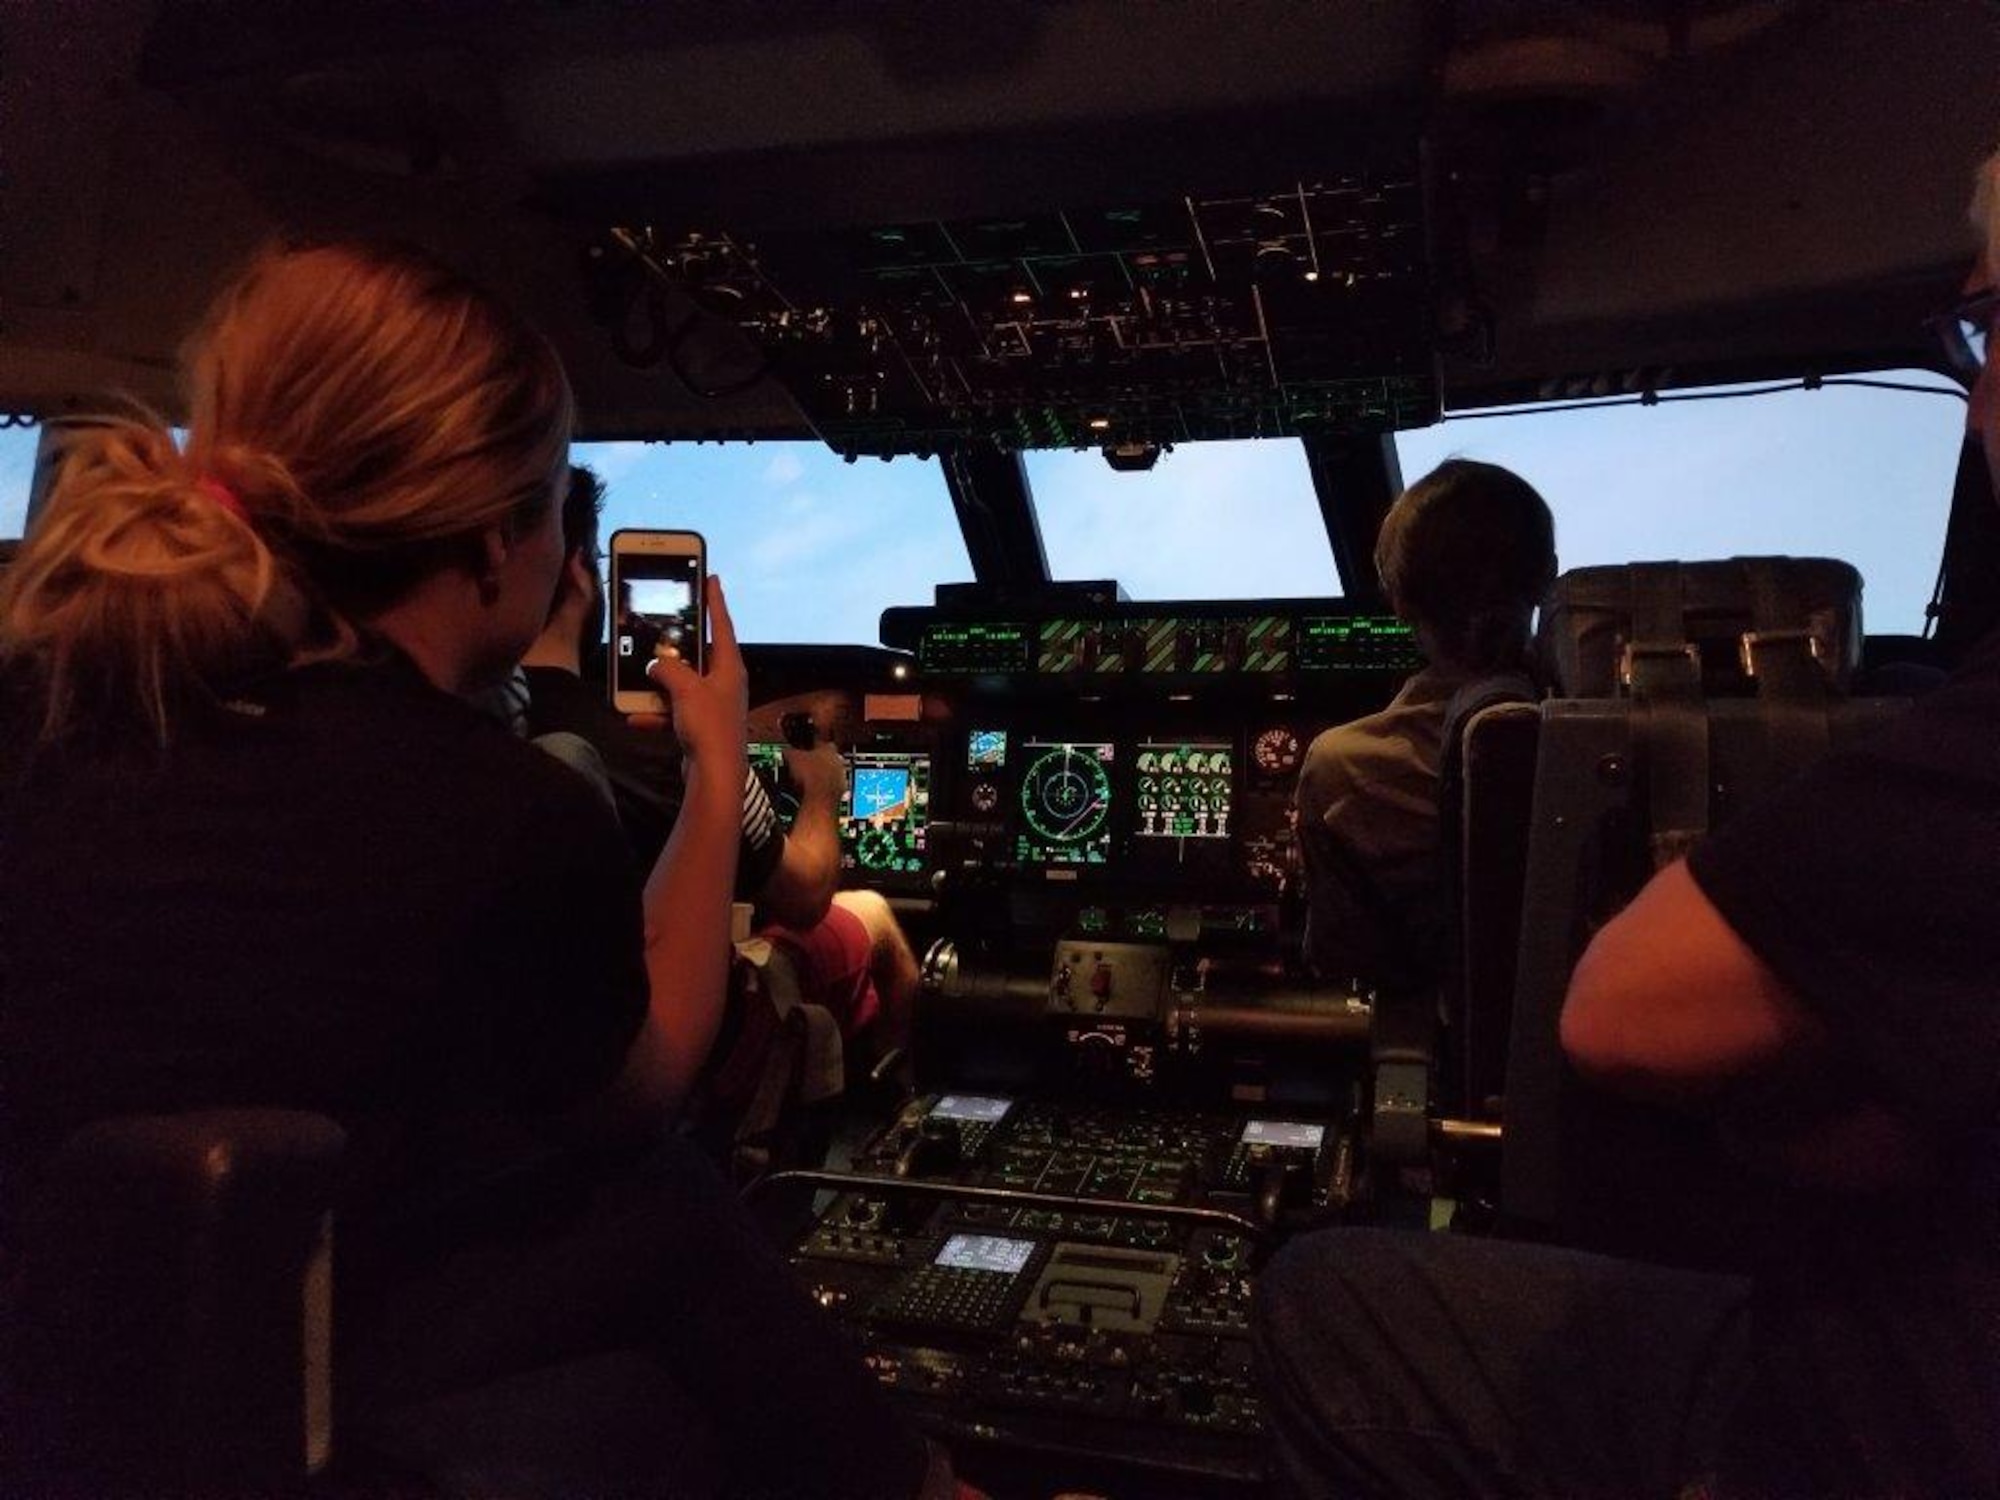 Civic Leader, Britni Ridolfi, Captures her experience on her cell phone of flying in a C-5M Super Galaxy Simulator, Nov. 18, 2017, during a 433rd Operations’ Group on Joint Base San Antonio, Texas. (U.S. Air Force photo by Minnie Jones